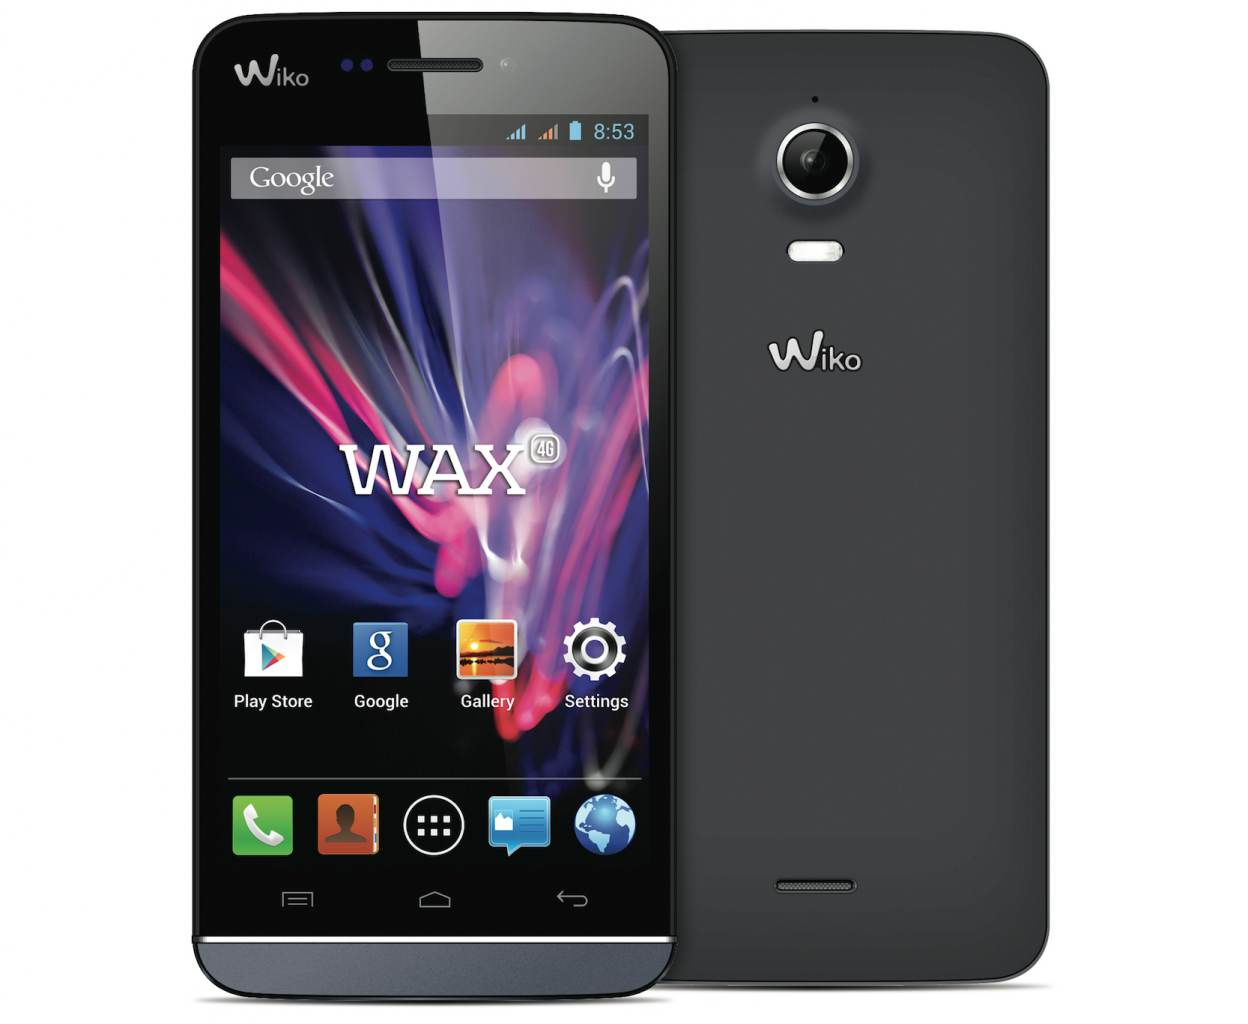 French company Wiko will have the first Tegra 4i smartphone on shelves within weeks